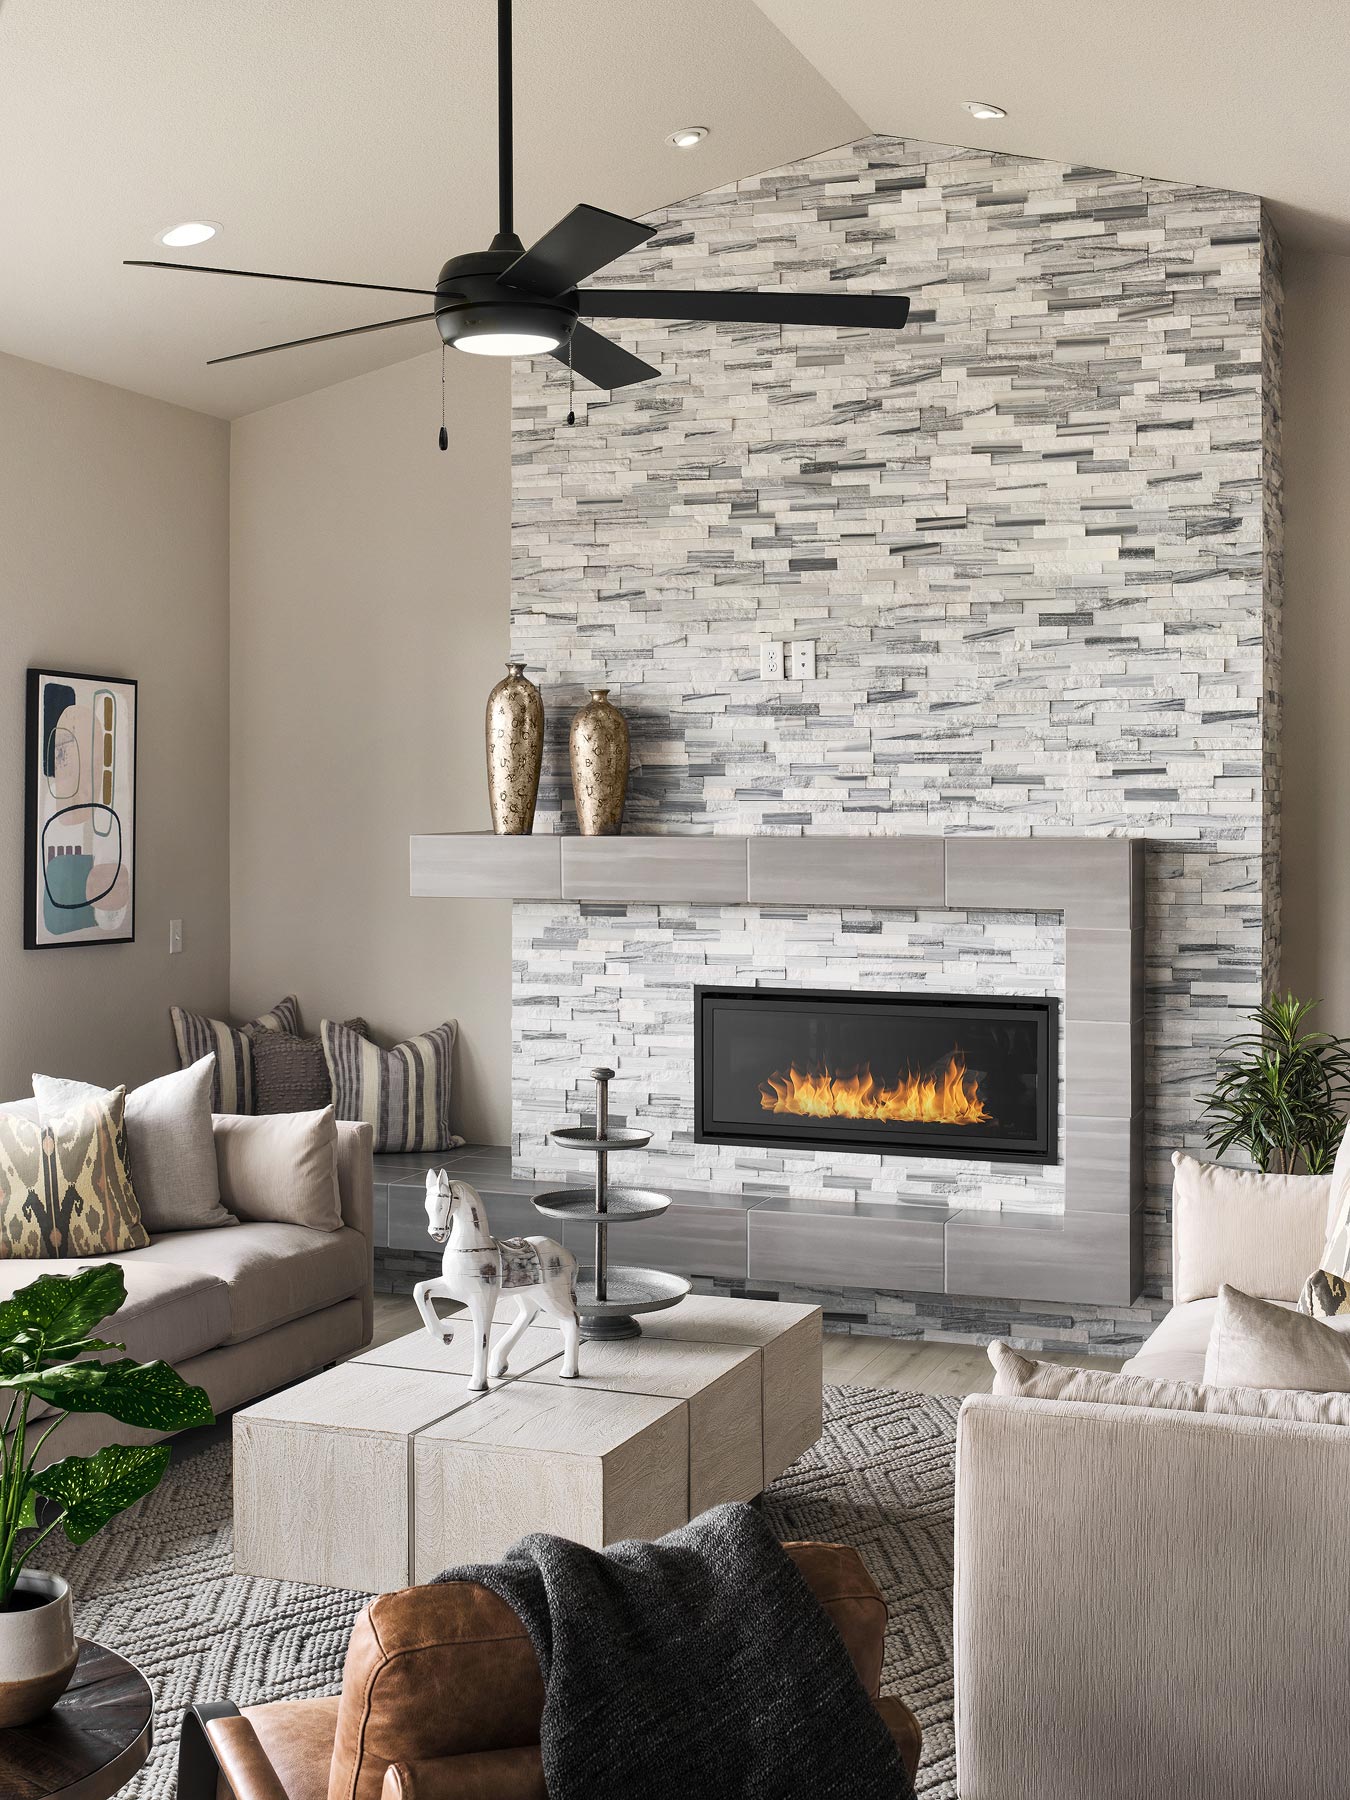 Residential branding photography by Warren Diggles. Living room and fireplace by Windmill Homes